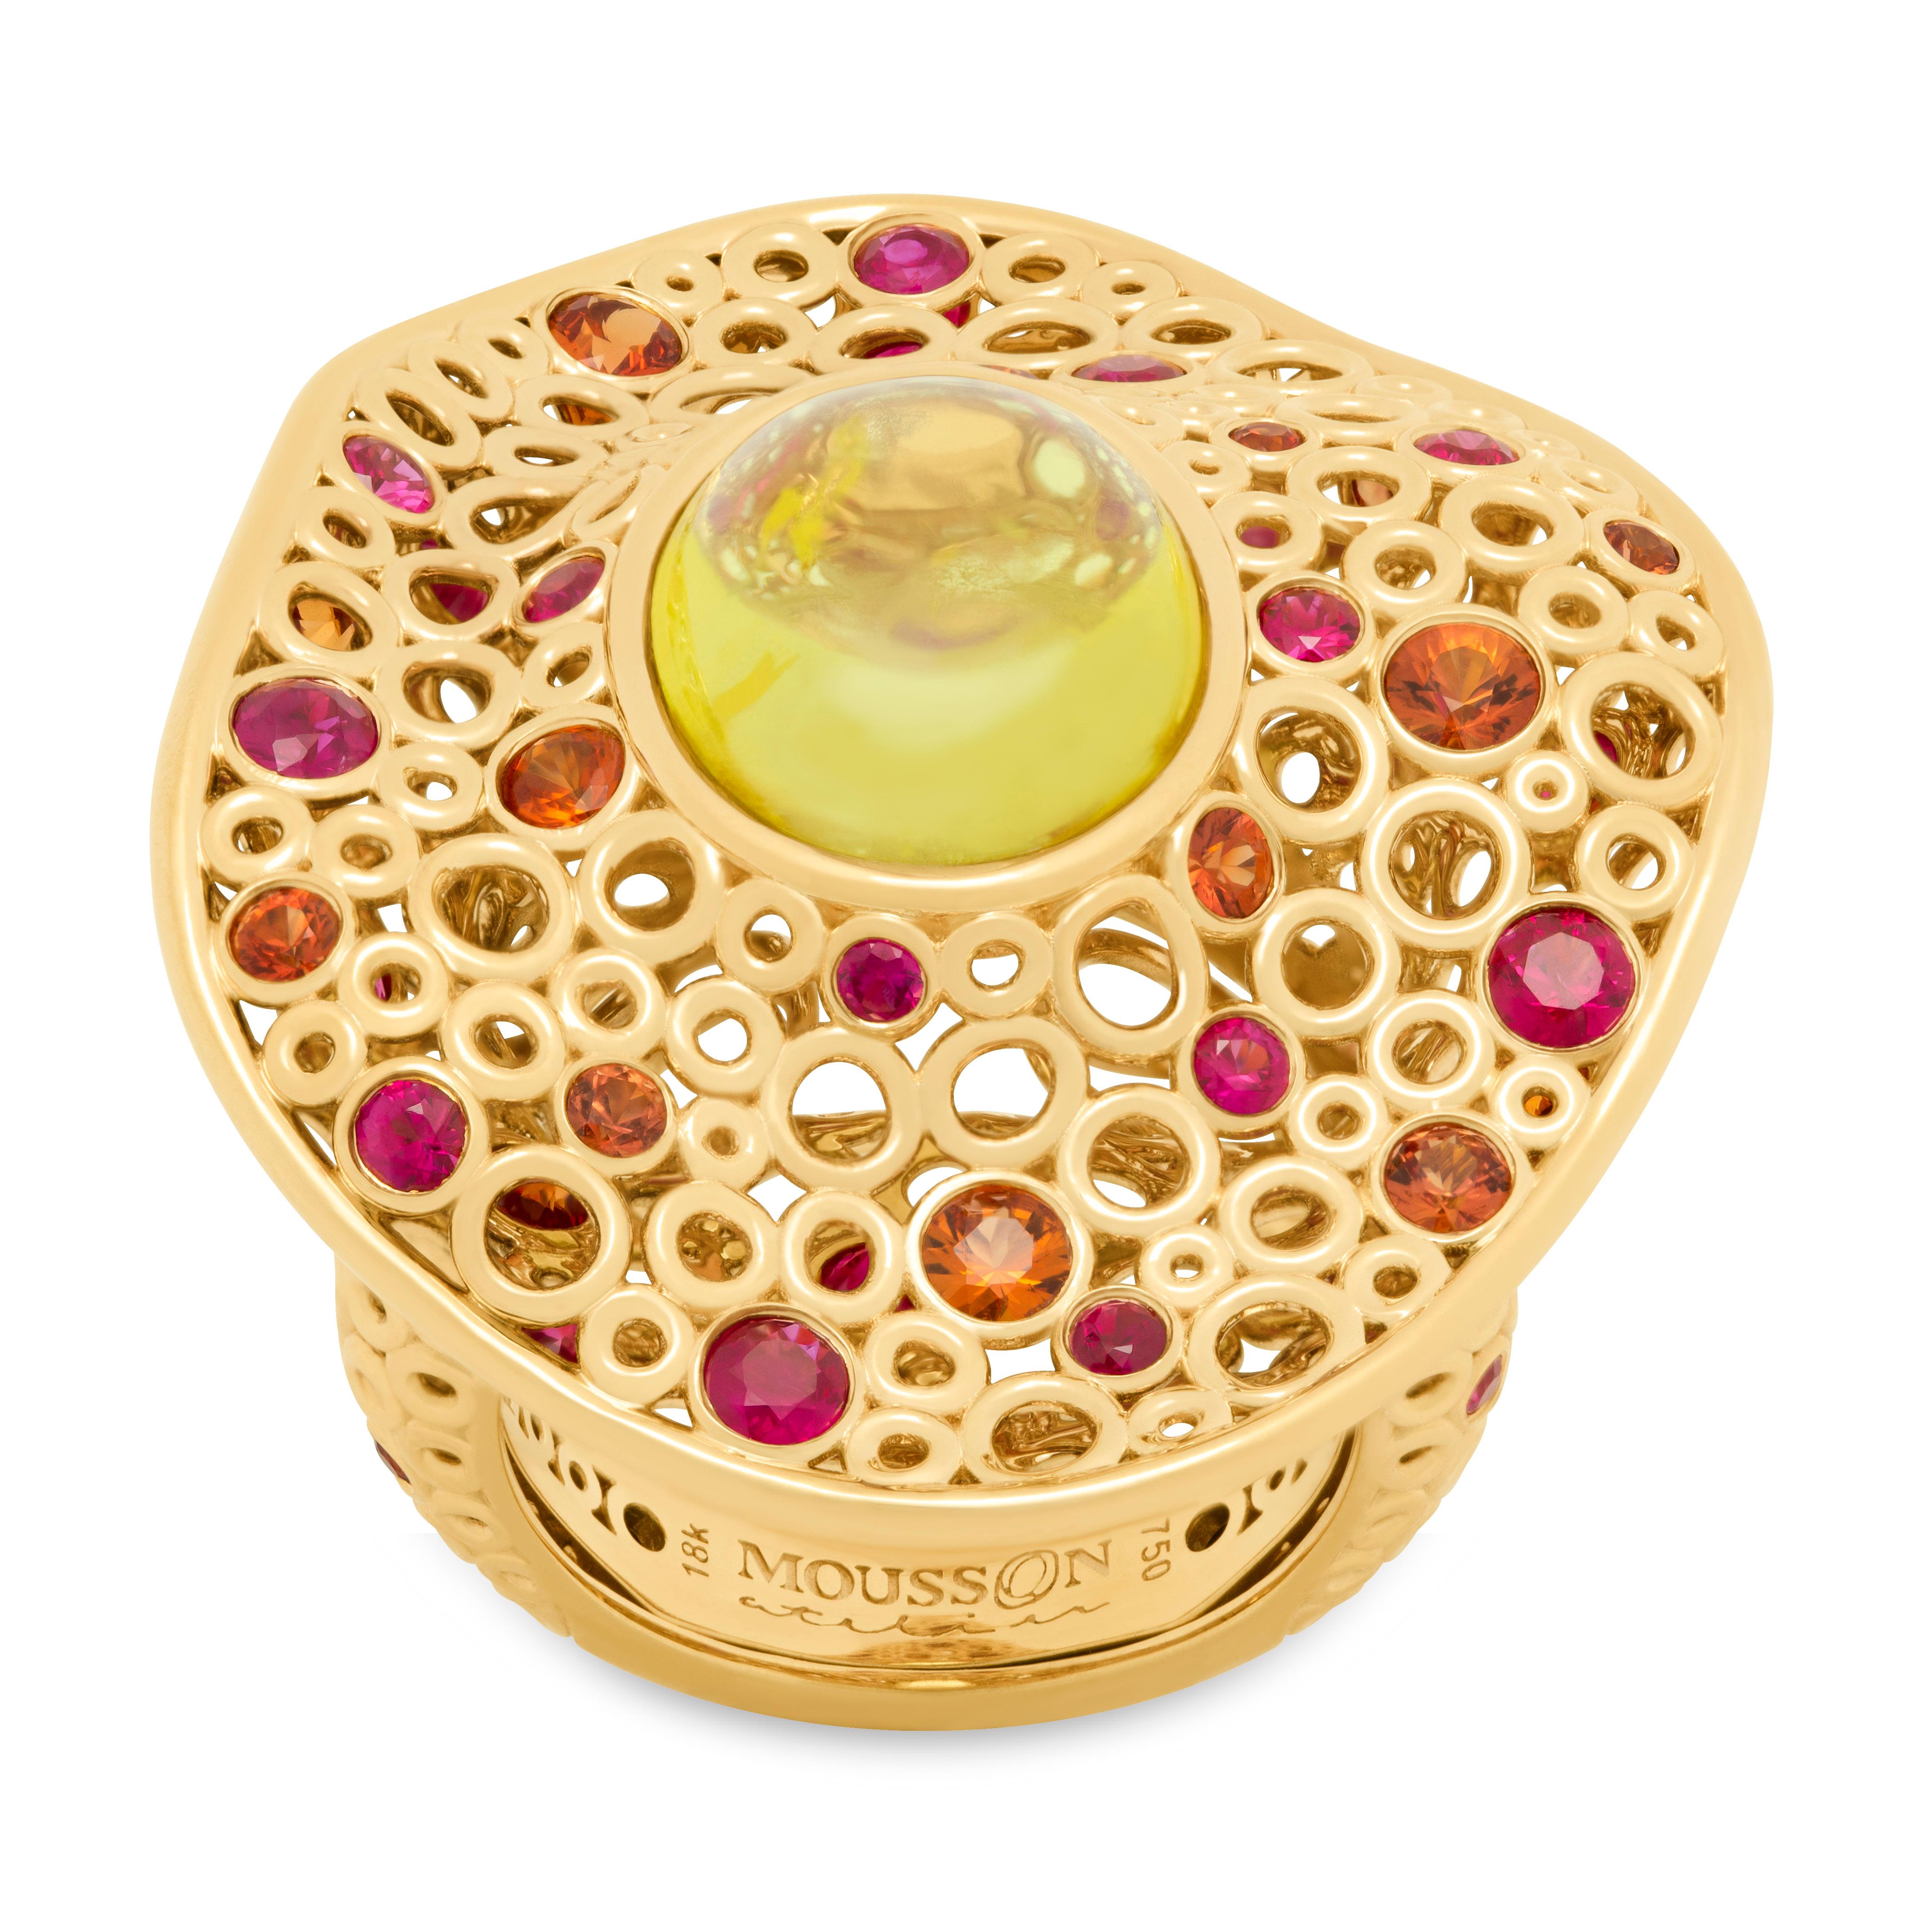 Canary Tourmaline 8.13 Carat Rubies Sapphires 18 Karat Yellow Gold Bubbles Ring
Incredibly light and airy Ring from our Bubbles Collection. Yellow 18 Karat Gold is made in the form of variety of small bubbles, some of which have 26 Orange Sapphires